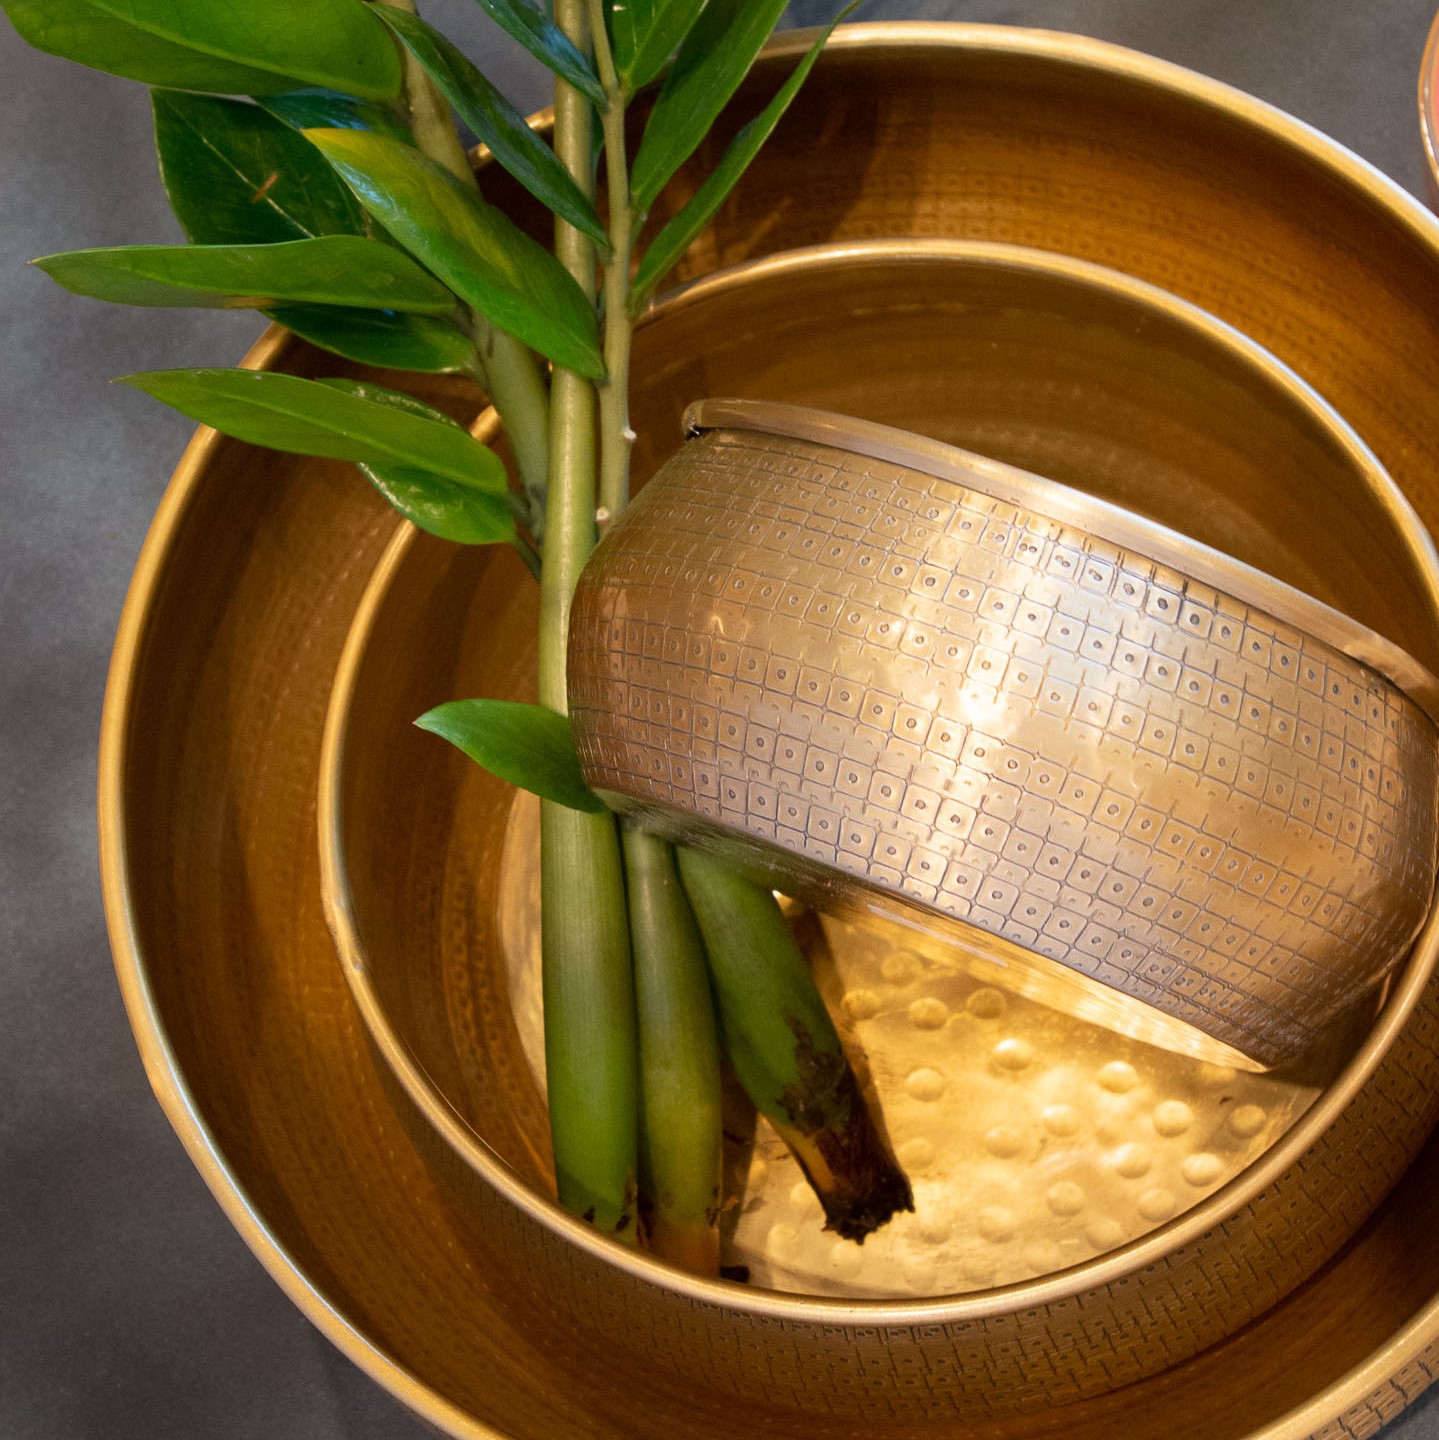 Image features all 3 sizes of the gold Tembesi bowl planter inside each other and some plants.